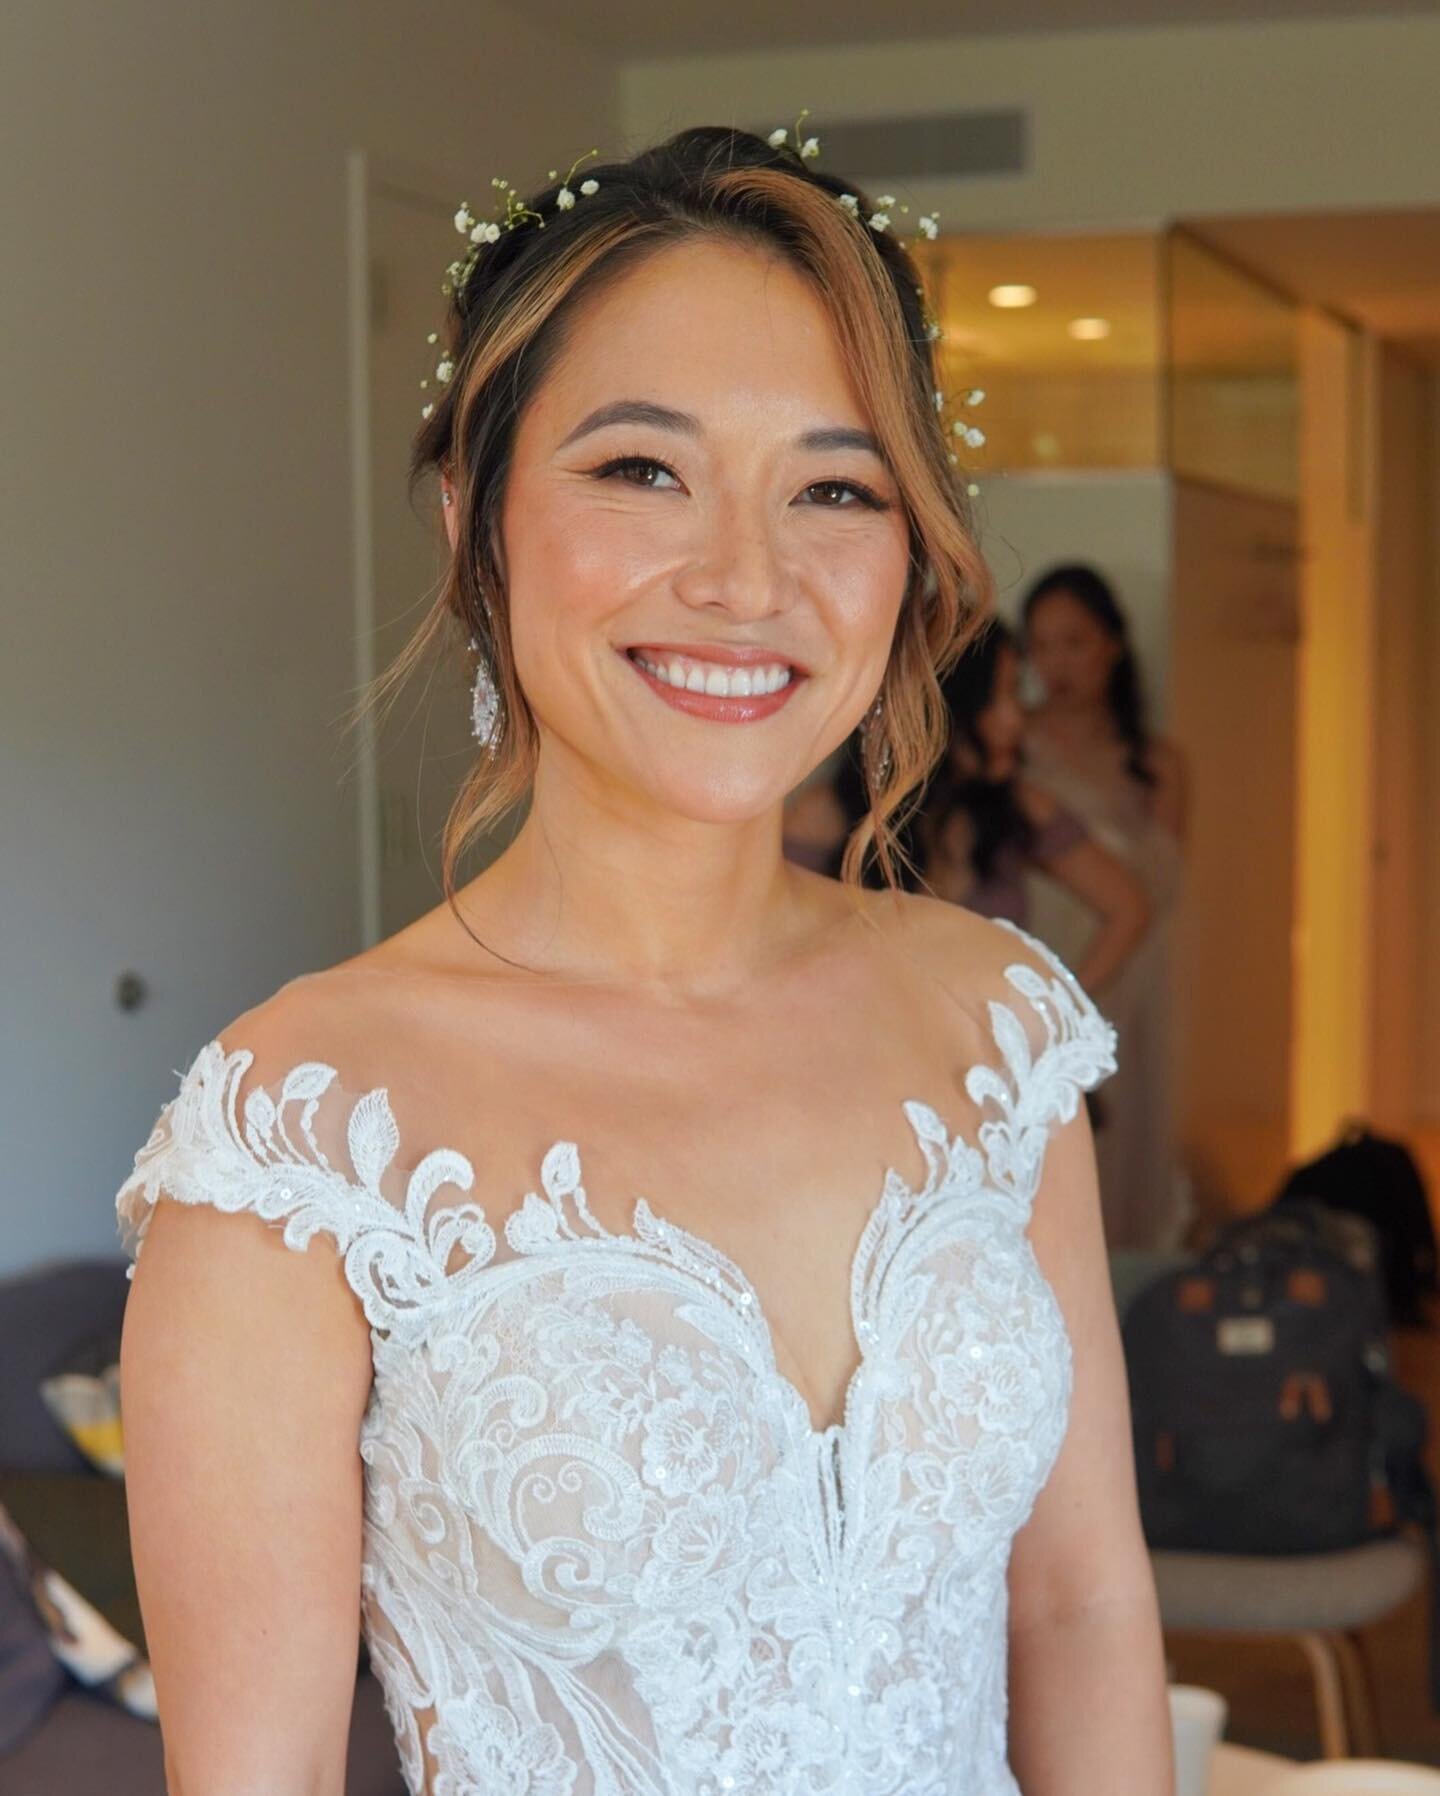 Traveled to Healdsburg for Alice&rsquo;s wedding today. She is just glowing with happiness. 😍

Makeup and hair by @maiflmua for @contourbridal.